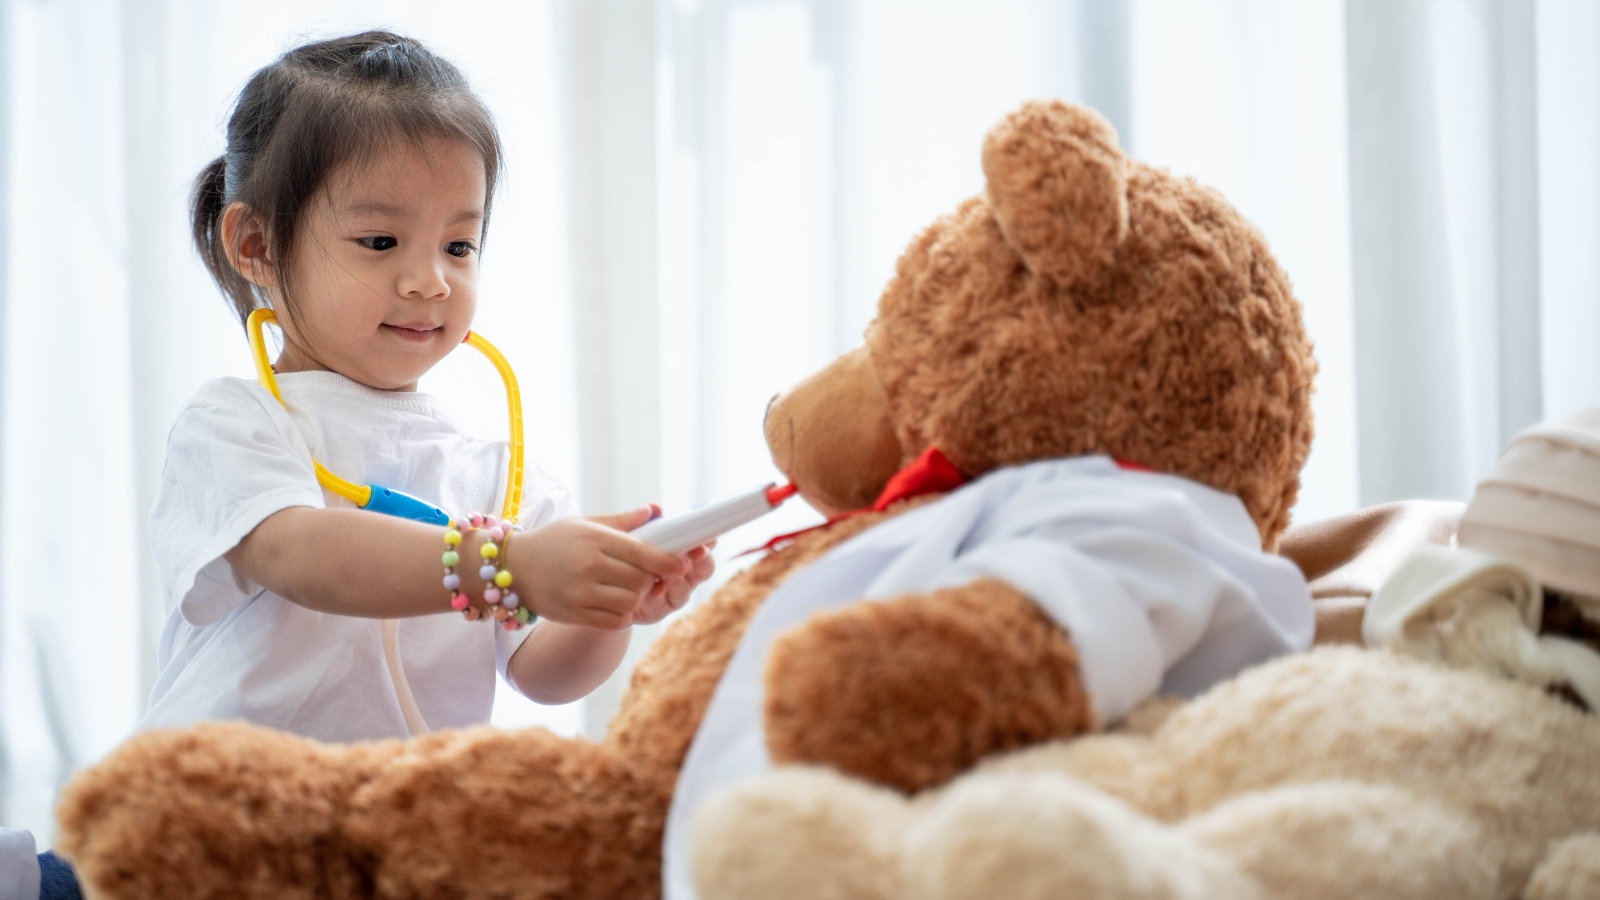 a young child uses a toy stethoscope and thermometer to care for a large teddy bear